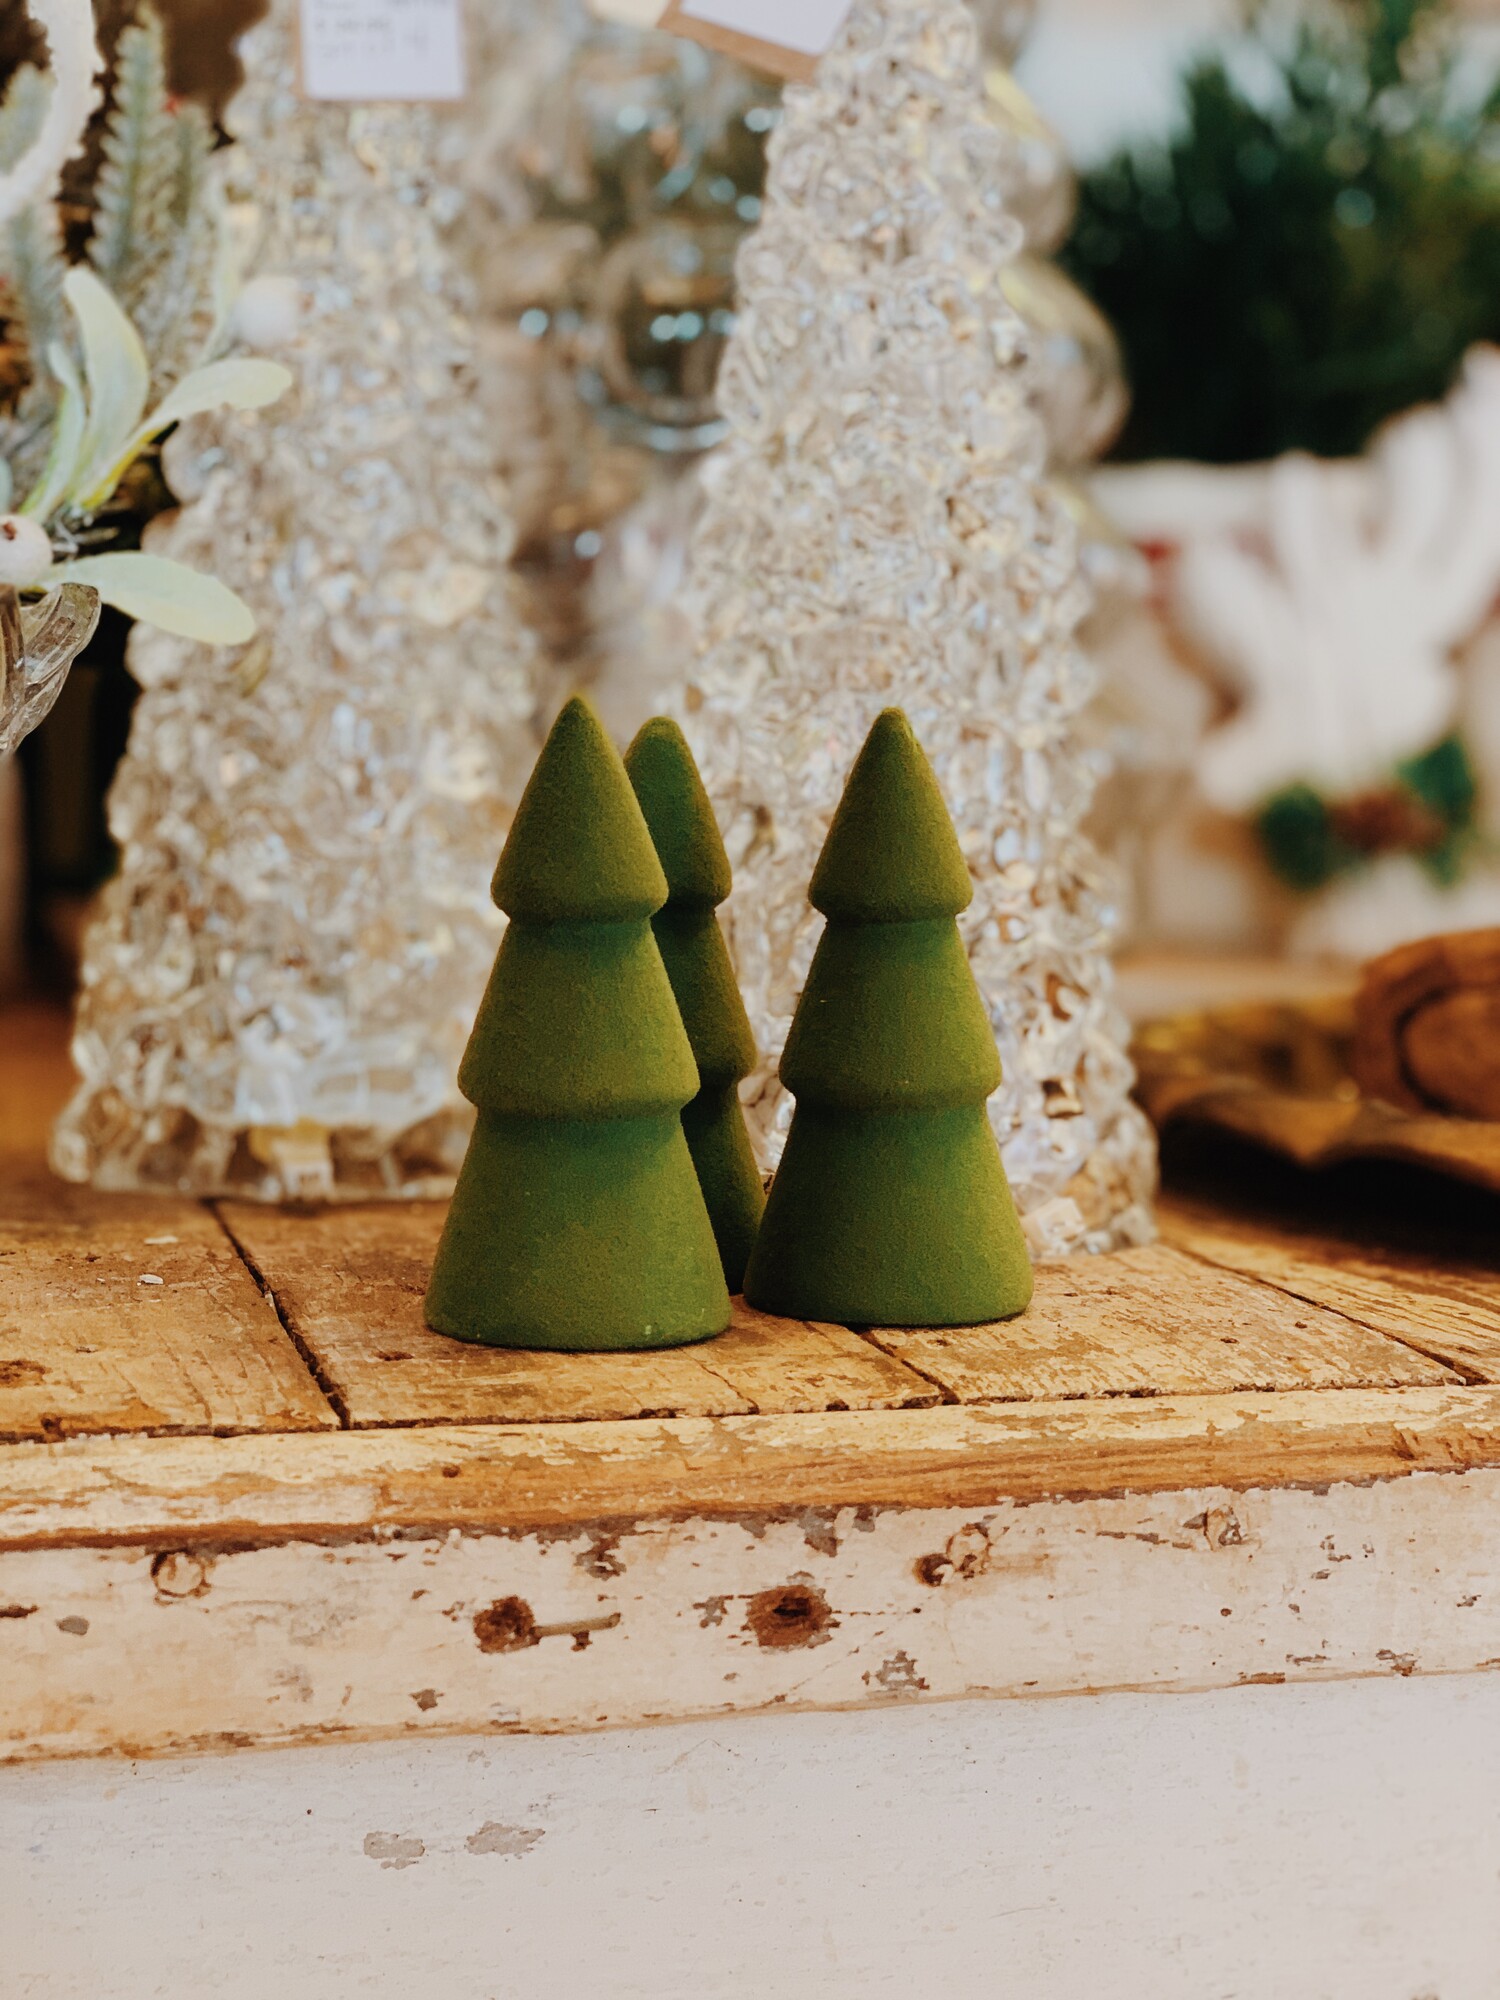 These adorable little trees measure 3.75 inches tall. They are ceramic with a velvet-like covering on the outside!